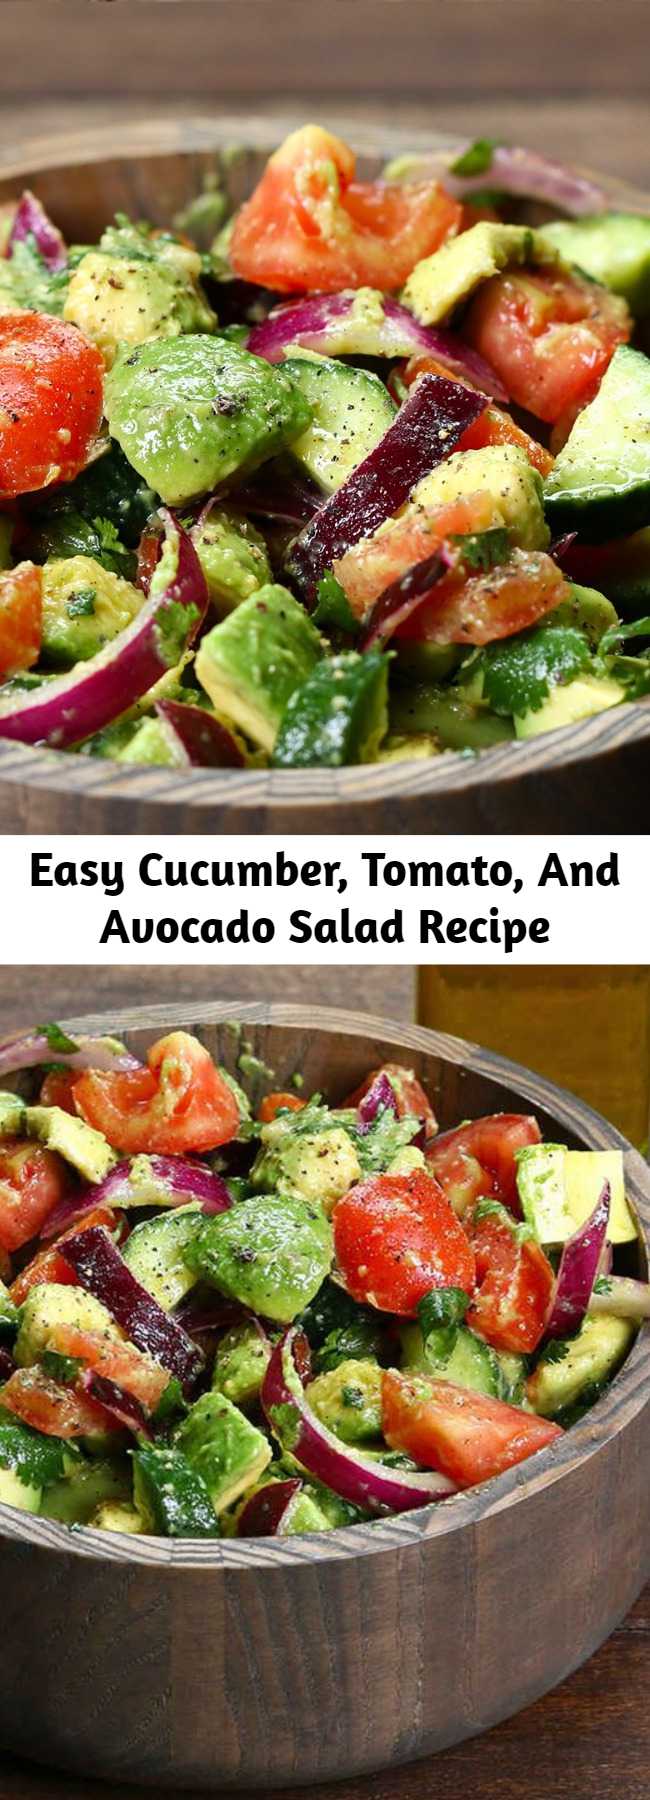 Easy Cucumber, Tomato, And Avocado Salad Recipe - Our family’s favorite classic cucumber and tomato salad just got better with the addition of avocado, a light and flavorful lemon dressing and the freshness of cilantro. Easy, excellent avocado salad.